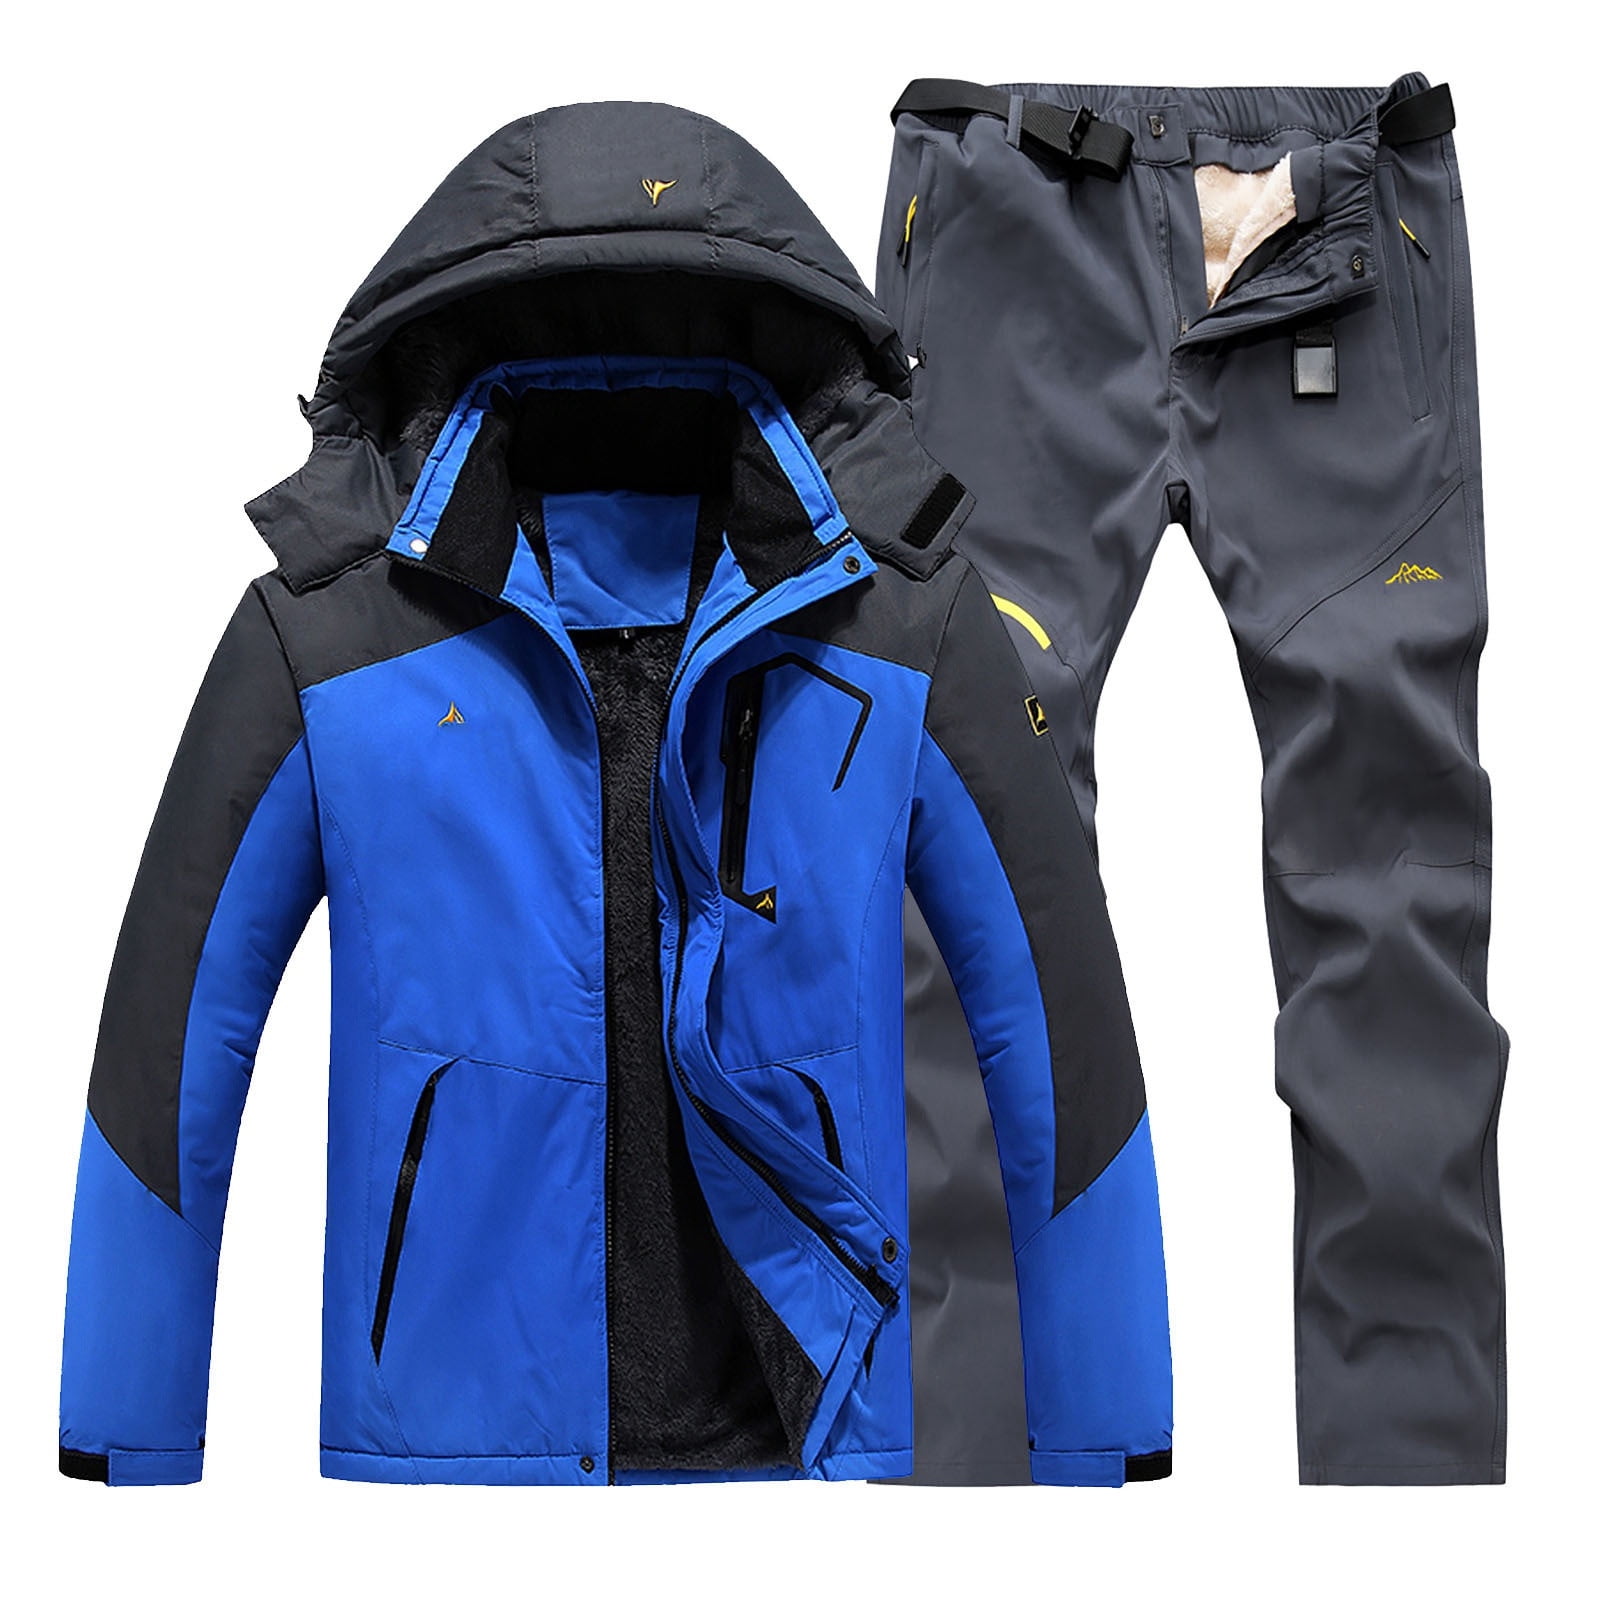 Men's Ski Wear Winter Windproof Hooded Jacket And Pants Suitable For ...